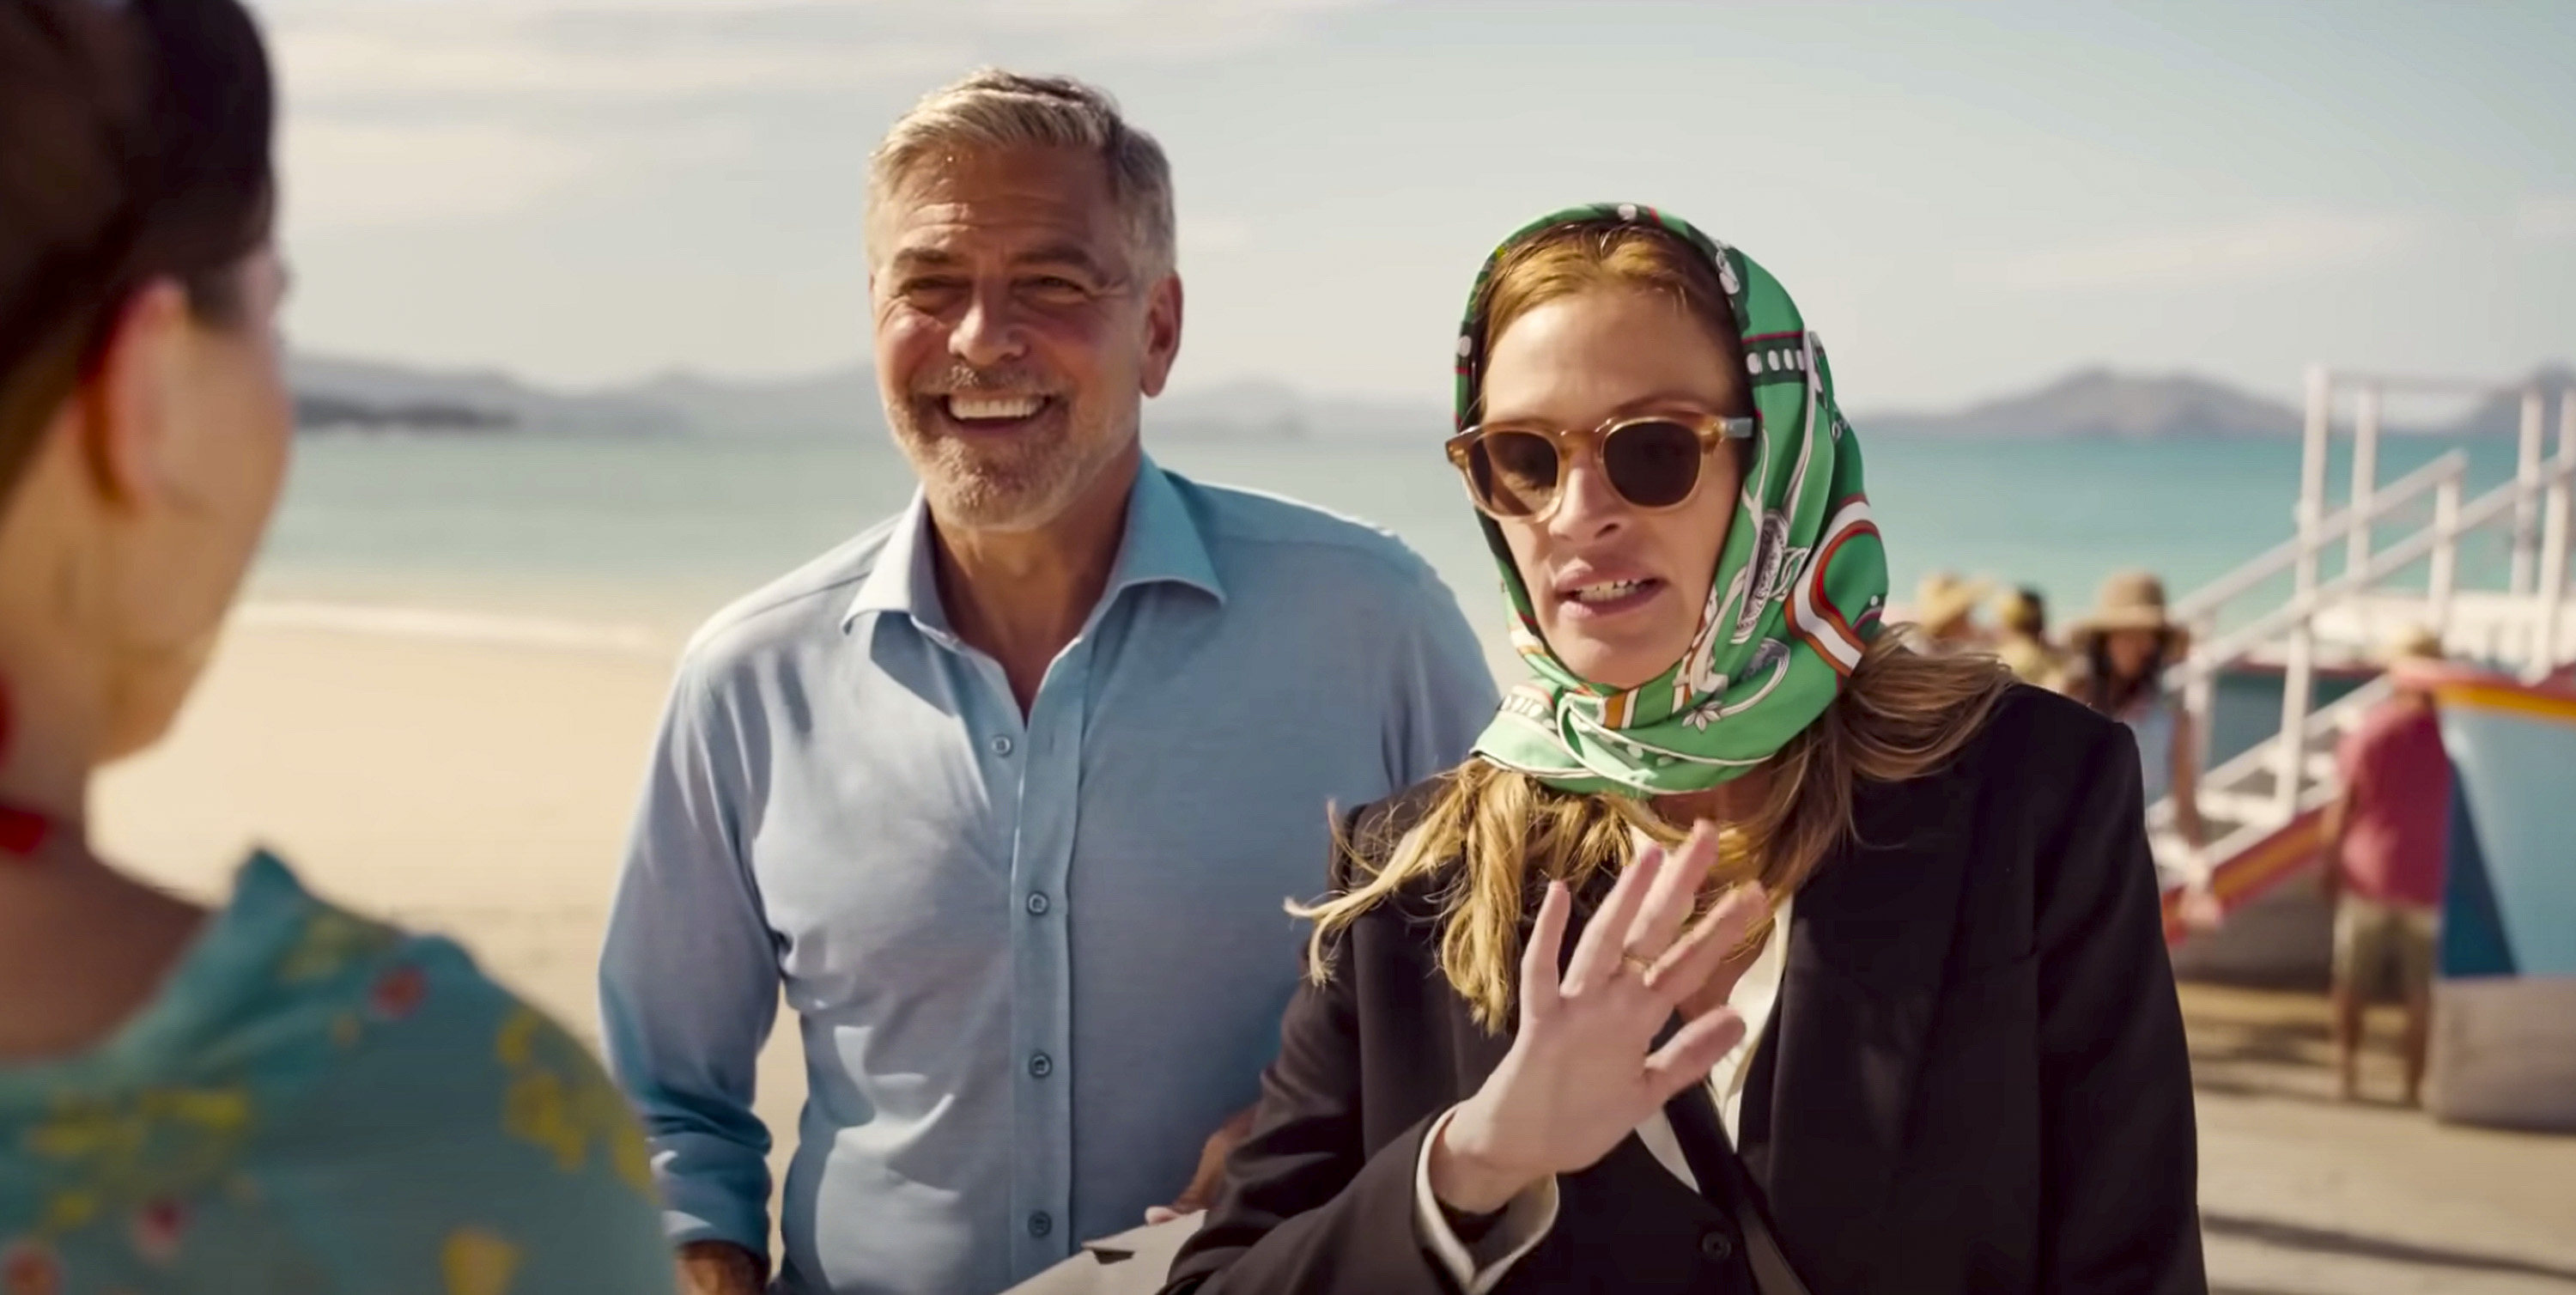 ‘Ticket to Paradise’ features Hollywood stars George Clooney and Julia Roberts and, while set in Bali, was shot in Australia. Photo: Handout Universal Pictures